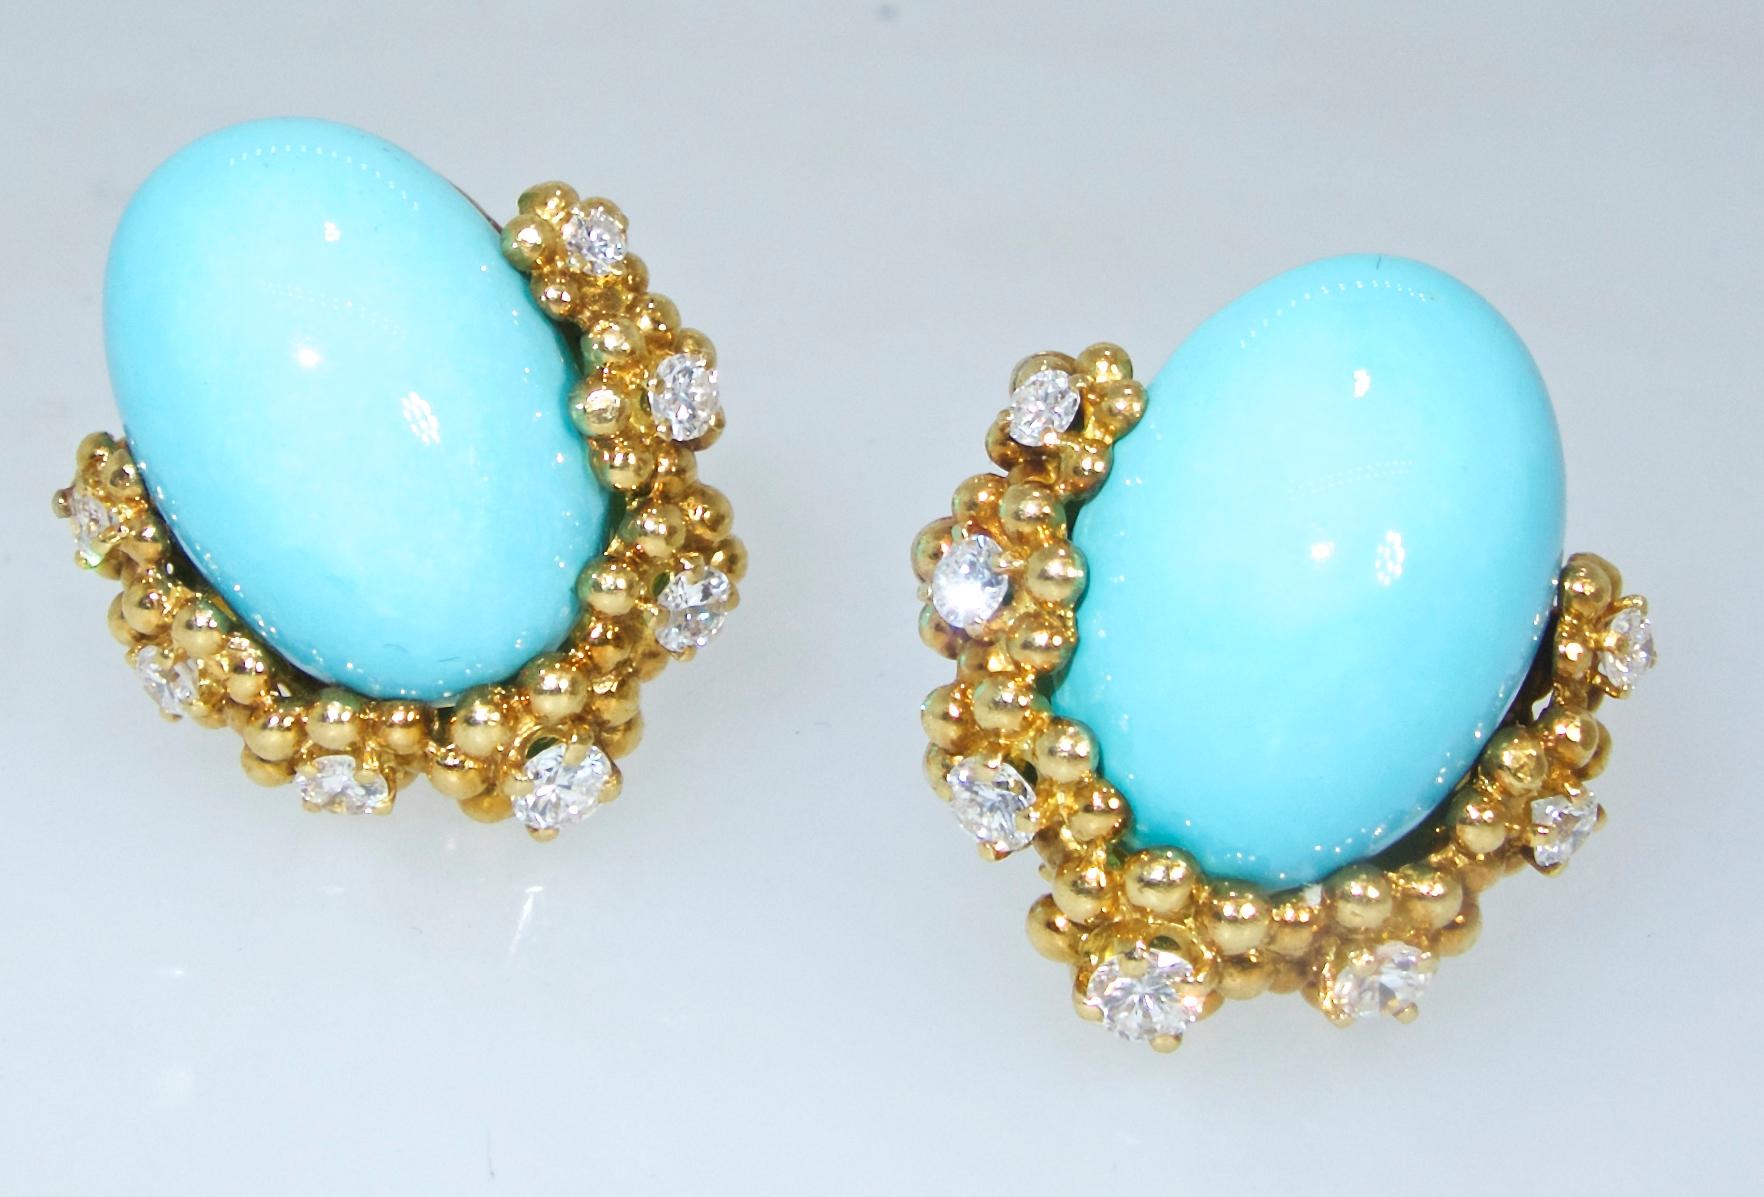 Tiffany & Co. Persian Turquoise and fine white diamond 18K earrings.  Well made with 14 fine bright white diamonds amounting to 1 ct., and centering fine Persian Turquoise.  This 18K gold earrings are slightly less than 1 inch in length, they are